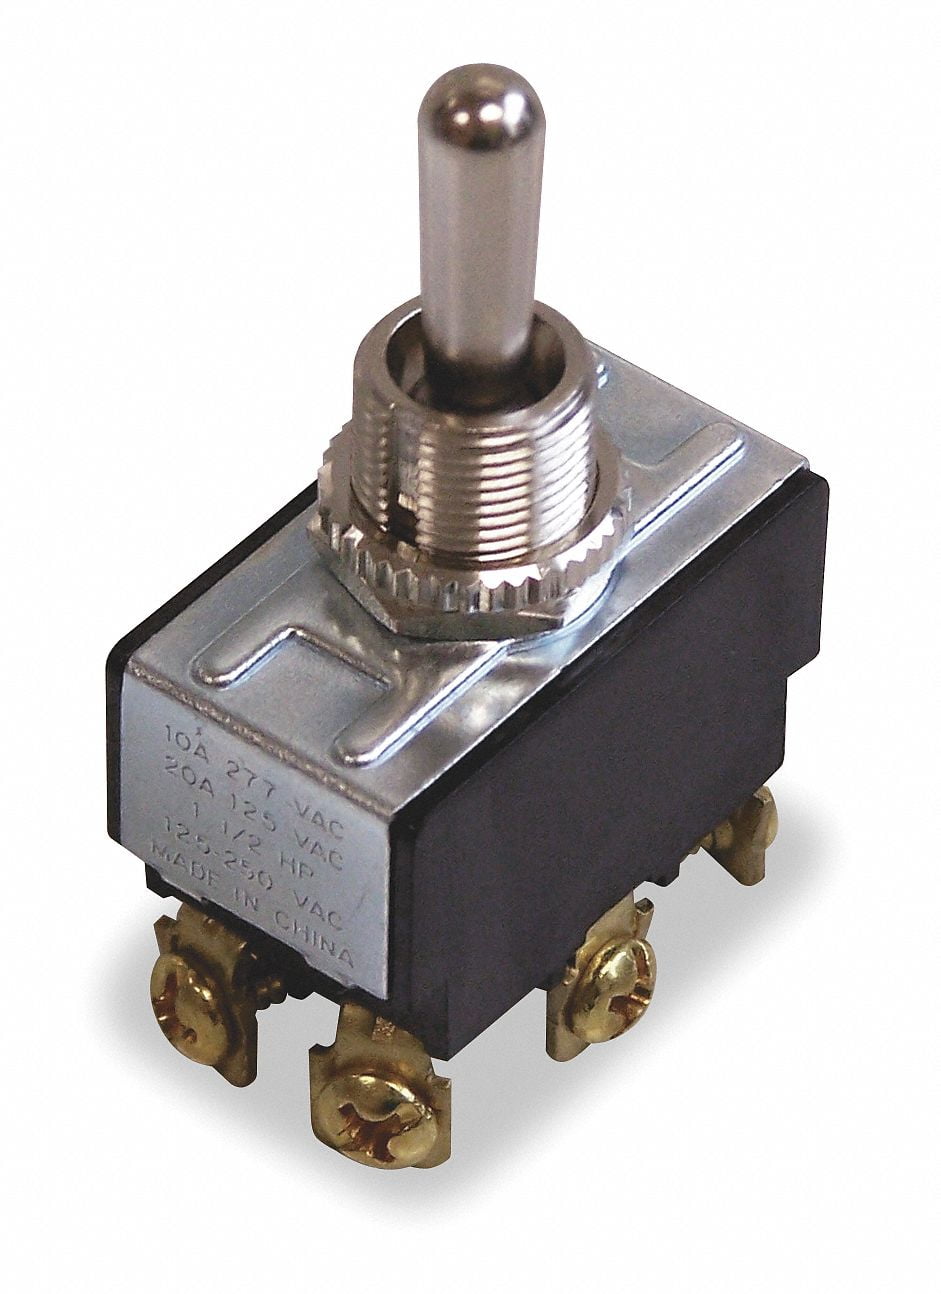 ON 6 TERMINALS 20A @ 125 VAC 1-1/2HP -OFF- 10A @ 277 VAC TOGGLE SWITCH, ON 